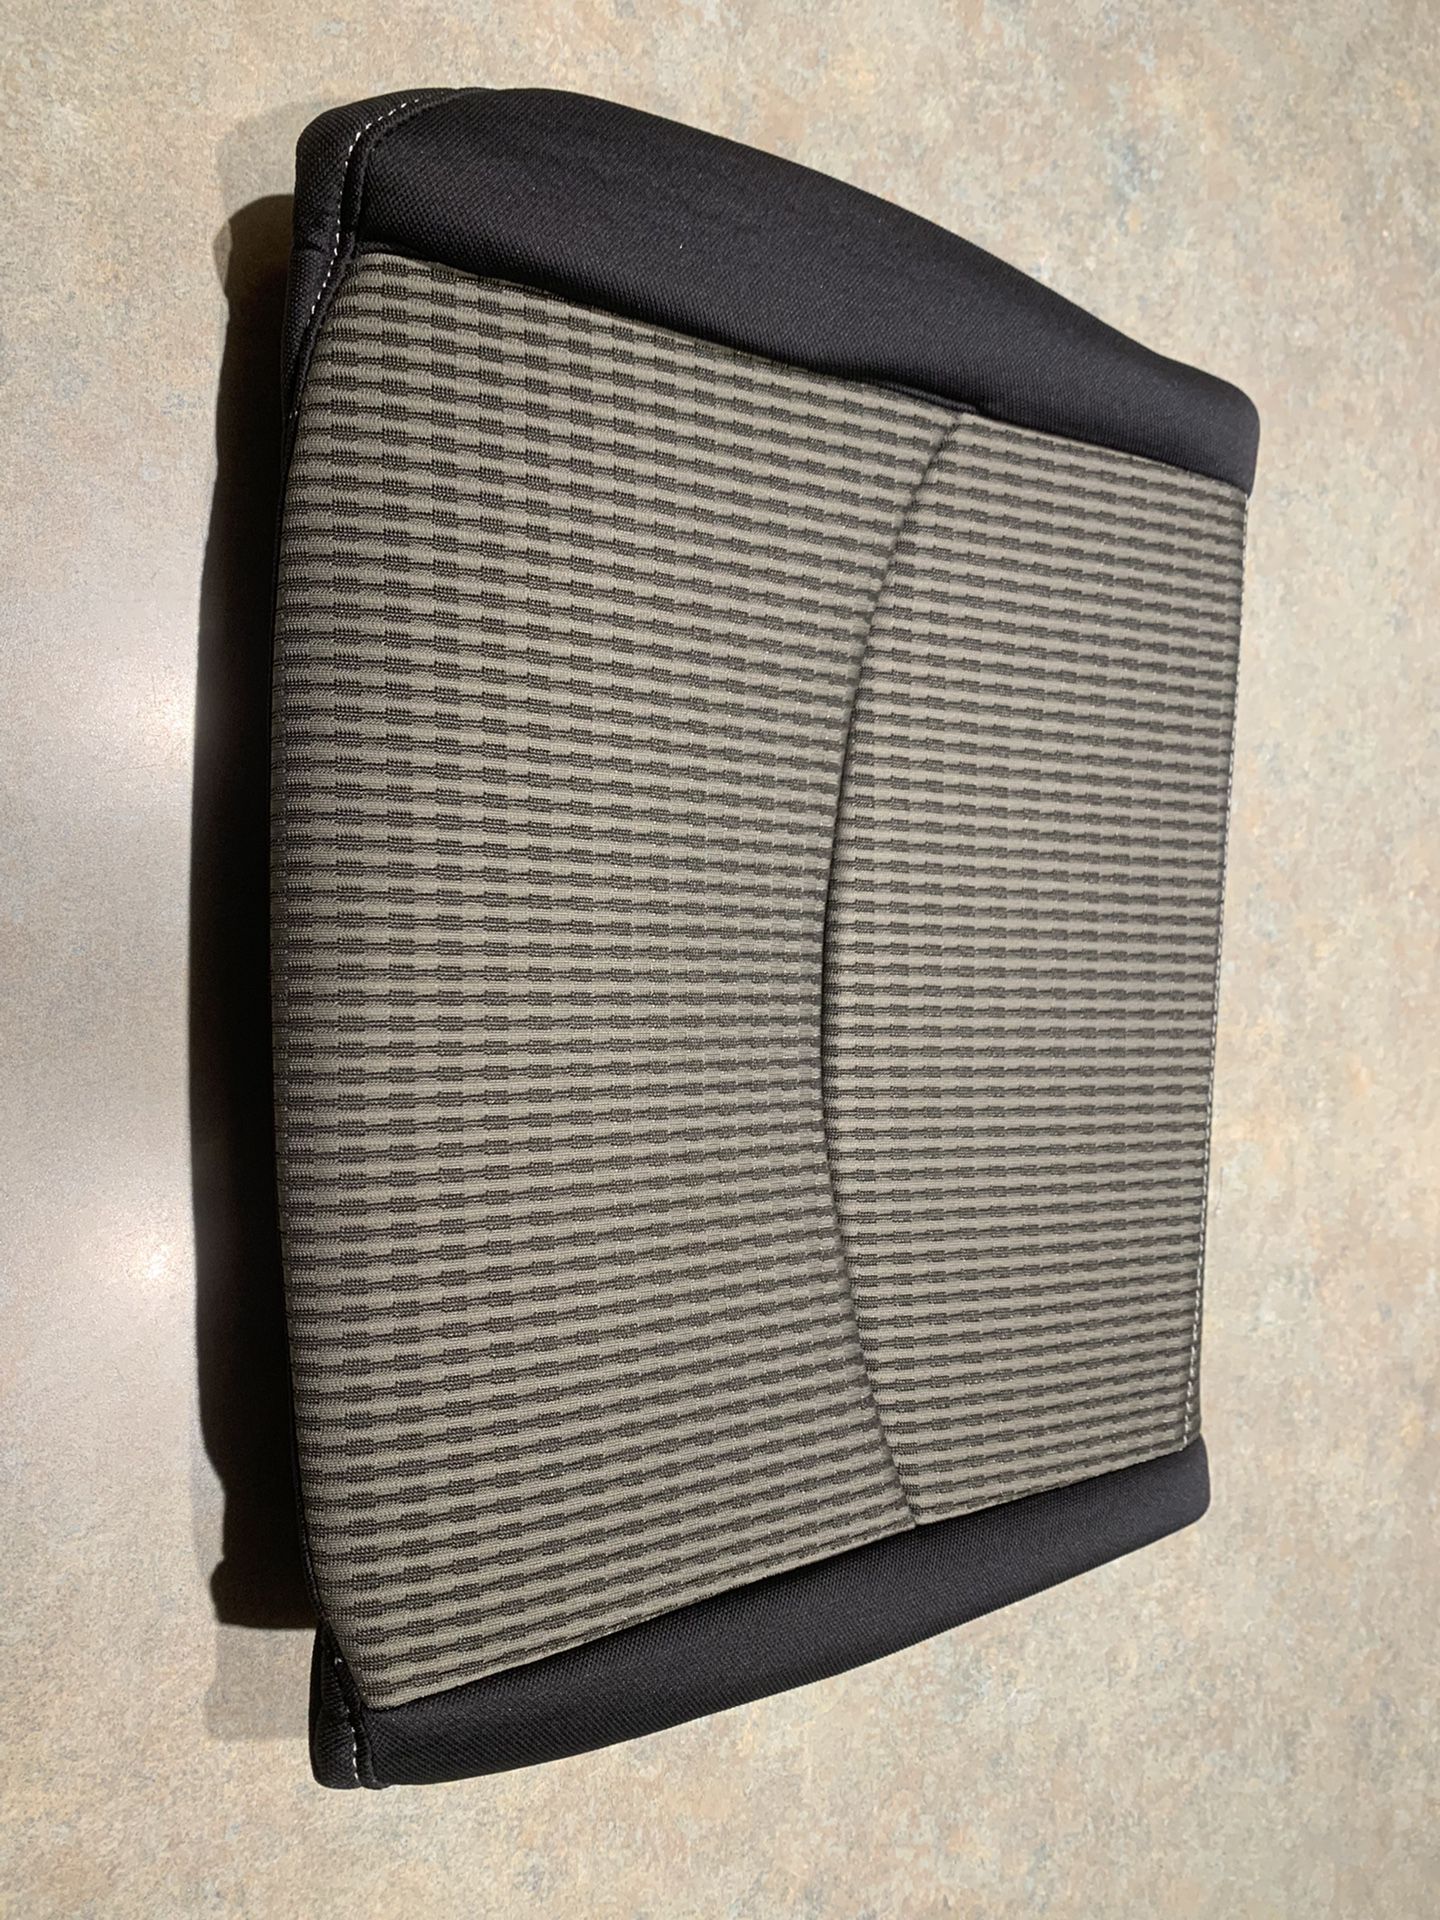 Dodge ram driver side bottom seat cushion cover replacement